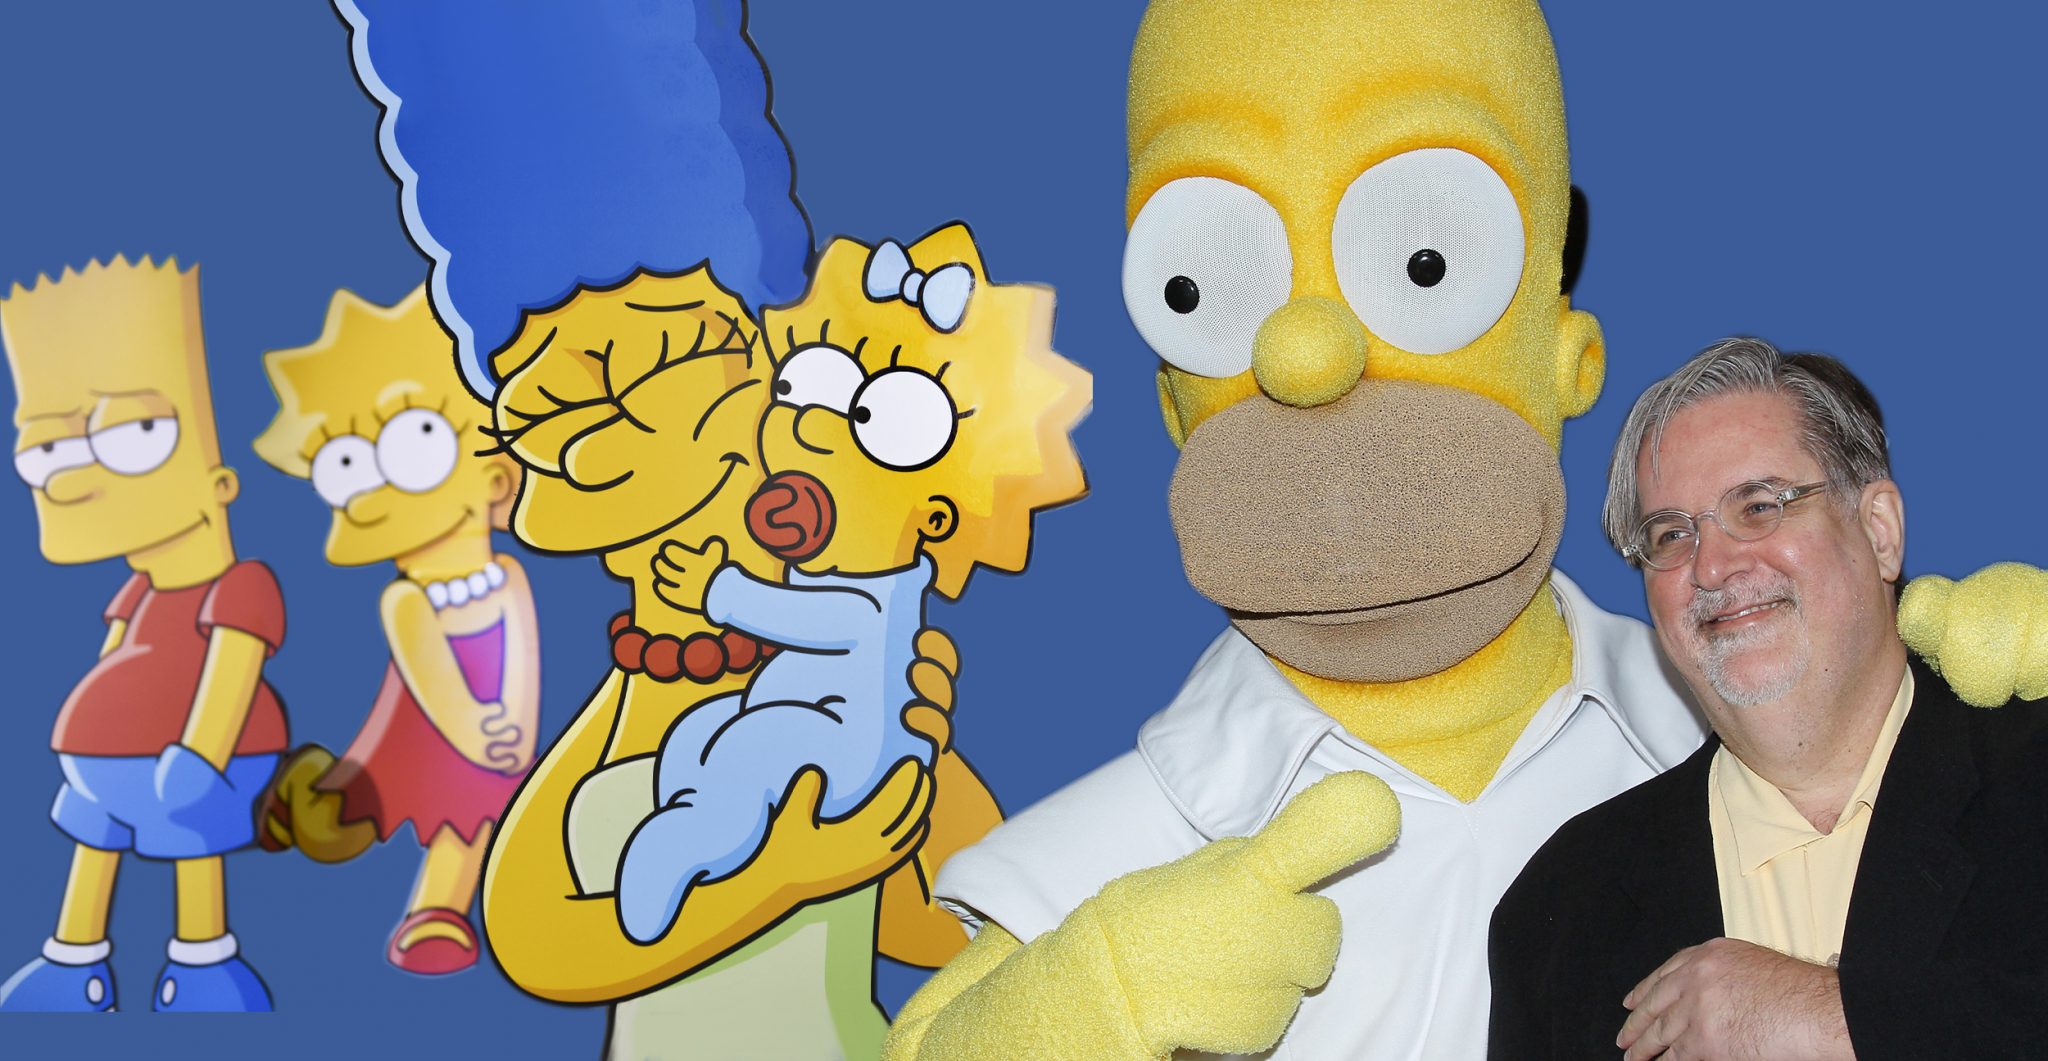 The Simpsons characters with creator Matt Groening. Getty Images